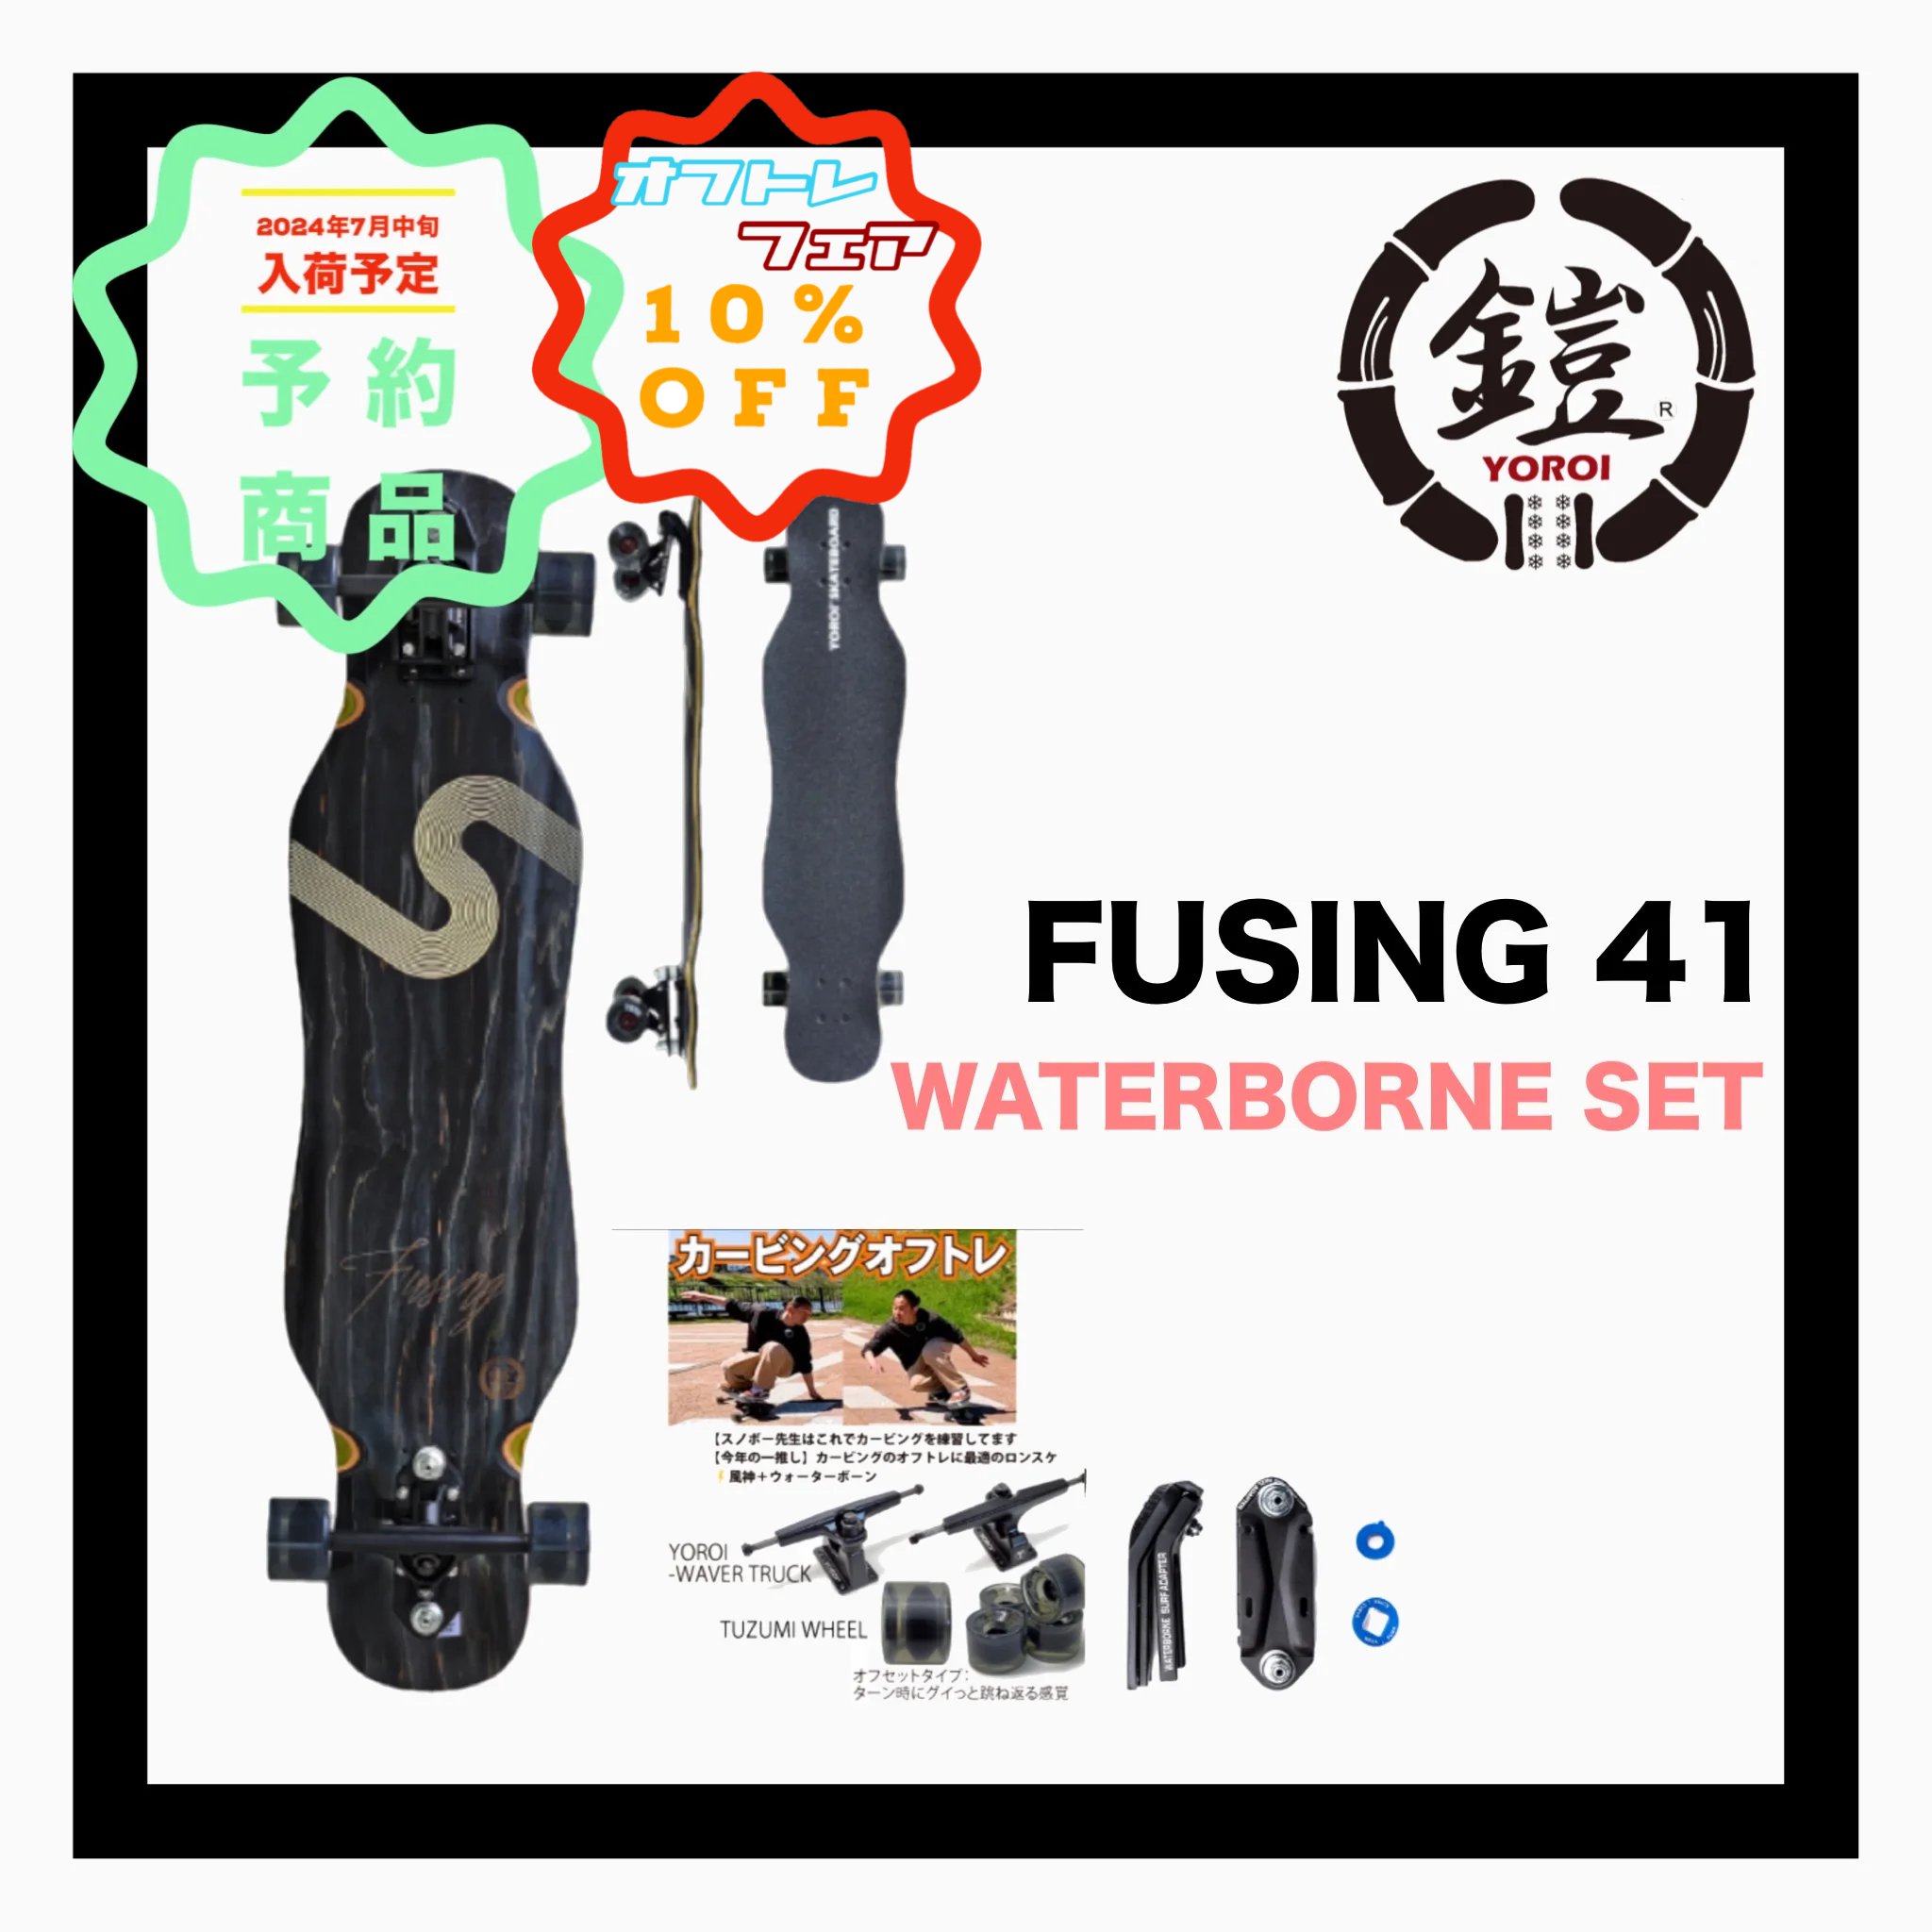 <img class='new_mark_img1' src='https://img.shop-pro.jp/img/new/icons14.gif' style='border:none;display:inline;margin:0px;padding:0px;width:auto;' />YOROI  SKATE BOARD YOROI SKATEBOARD FUSING WATER BORNE FIN SYSTEM 41